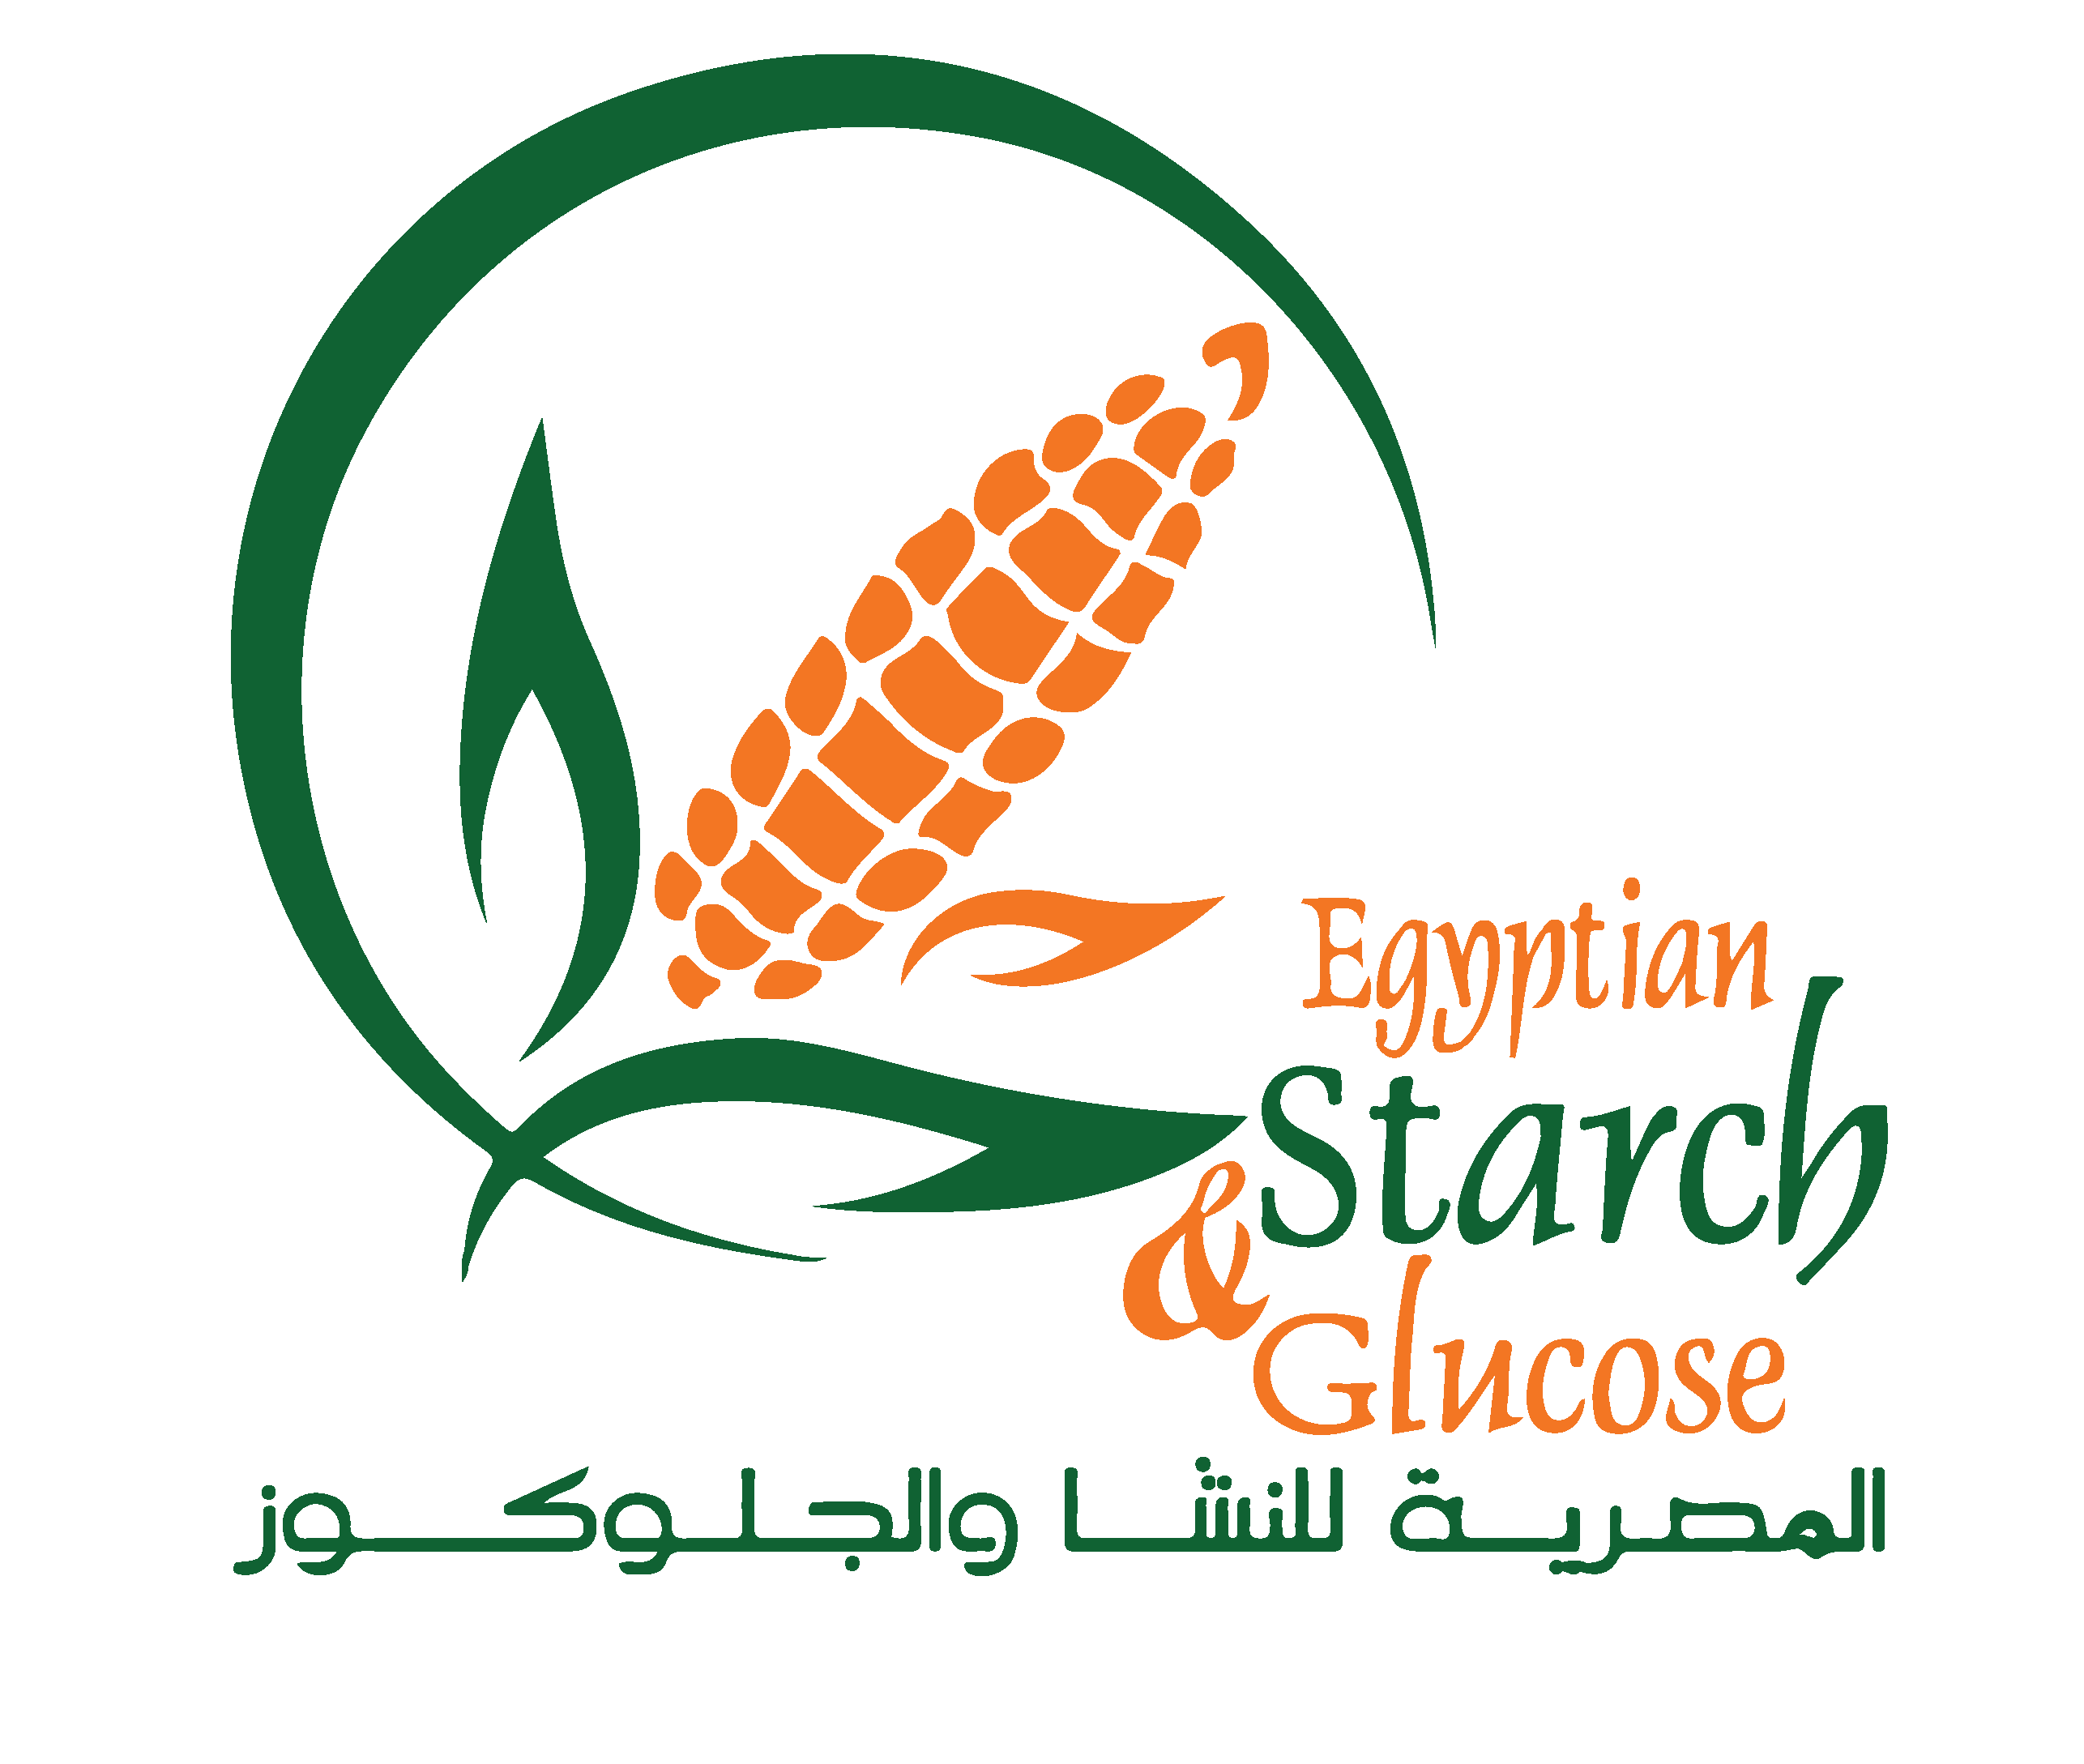 Egyptian Starch and Glucose - ESGC